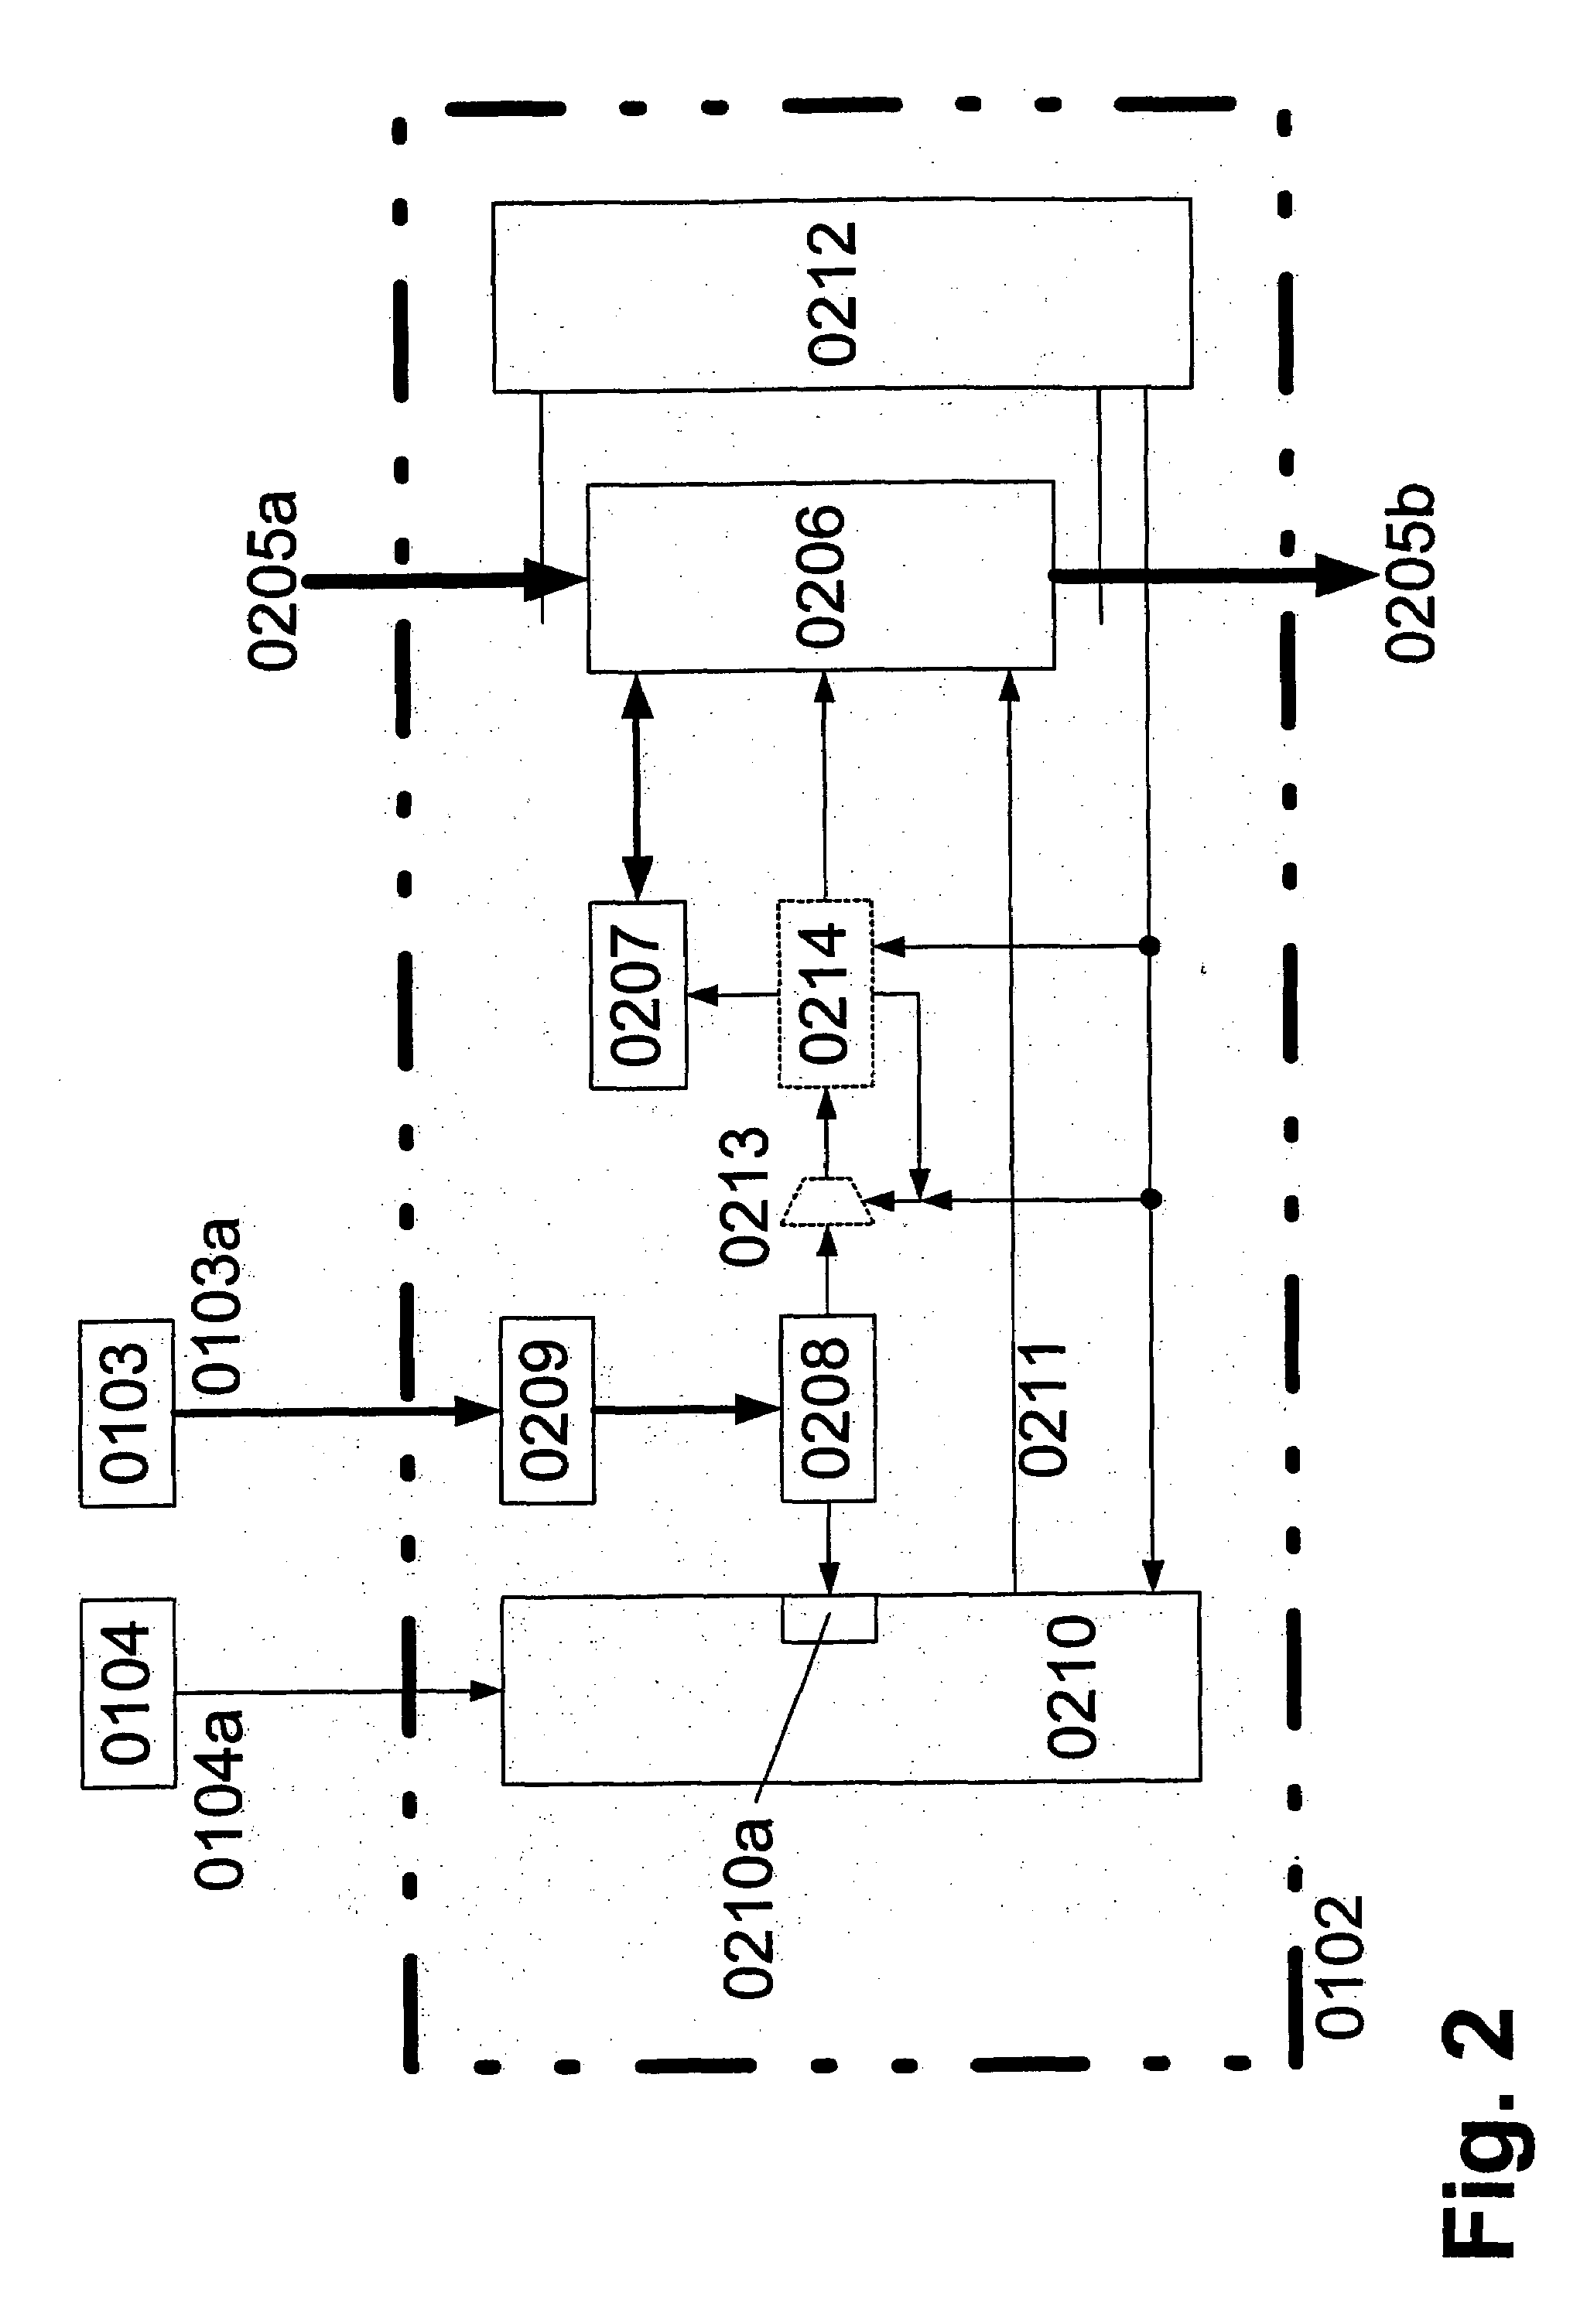 Methods and devices for treating and processing data